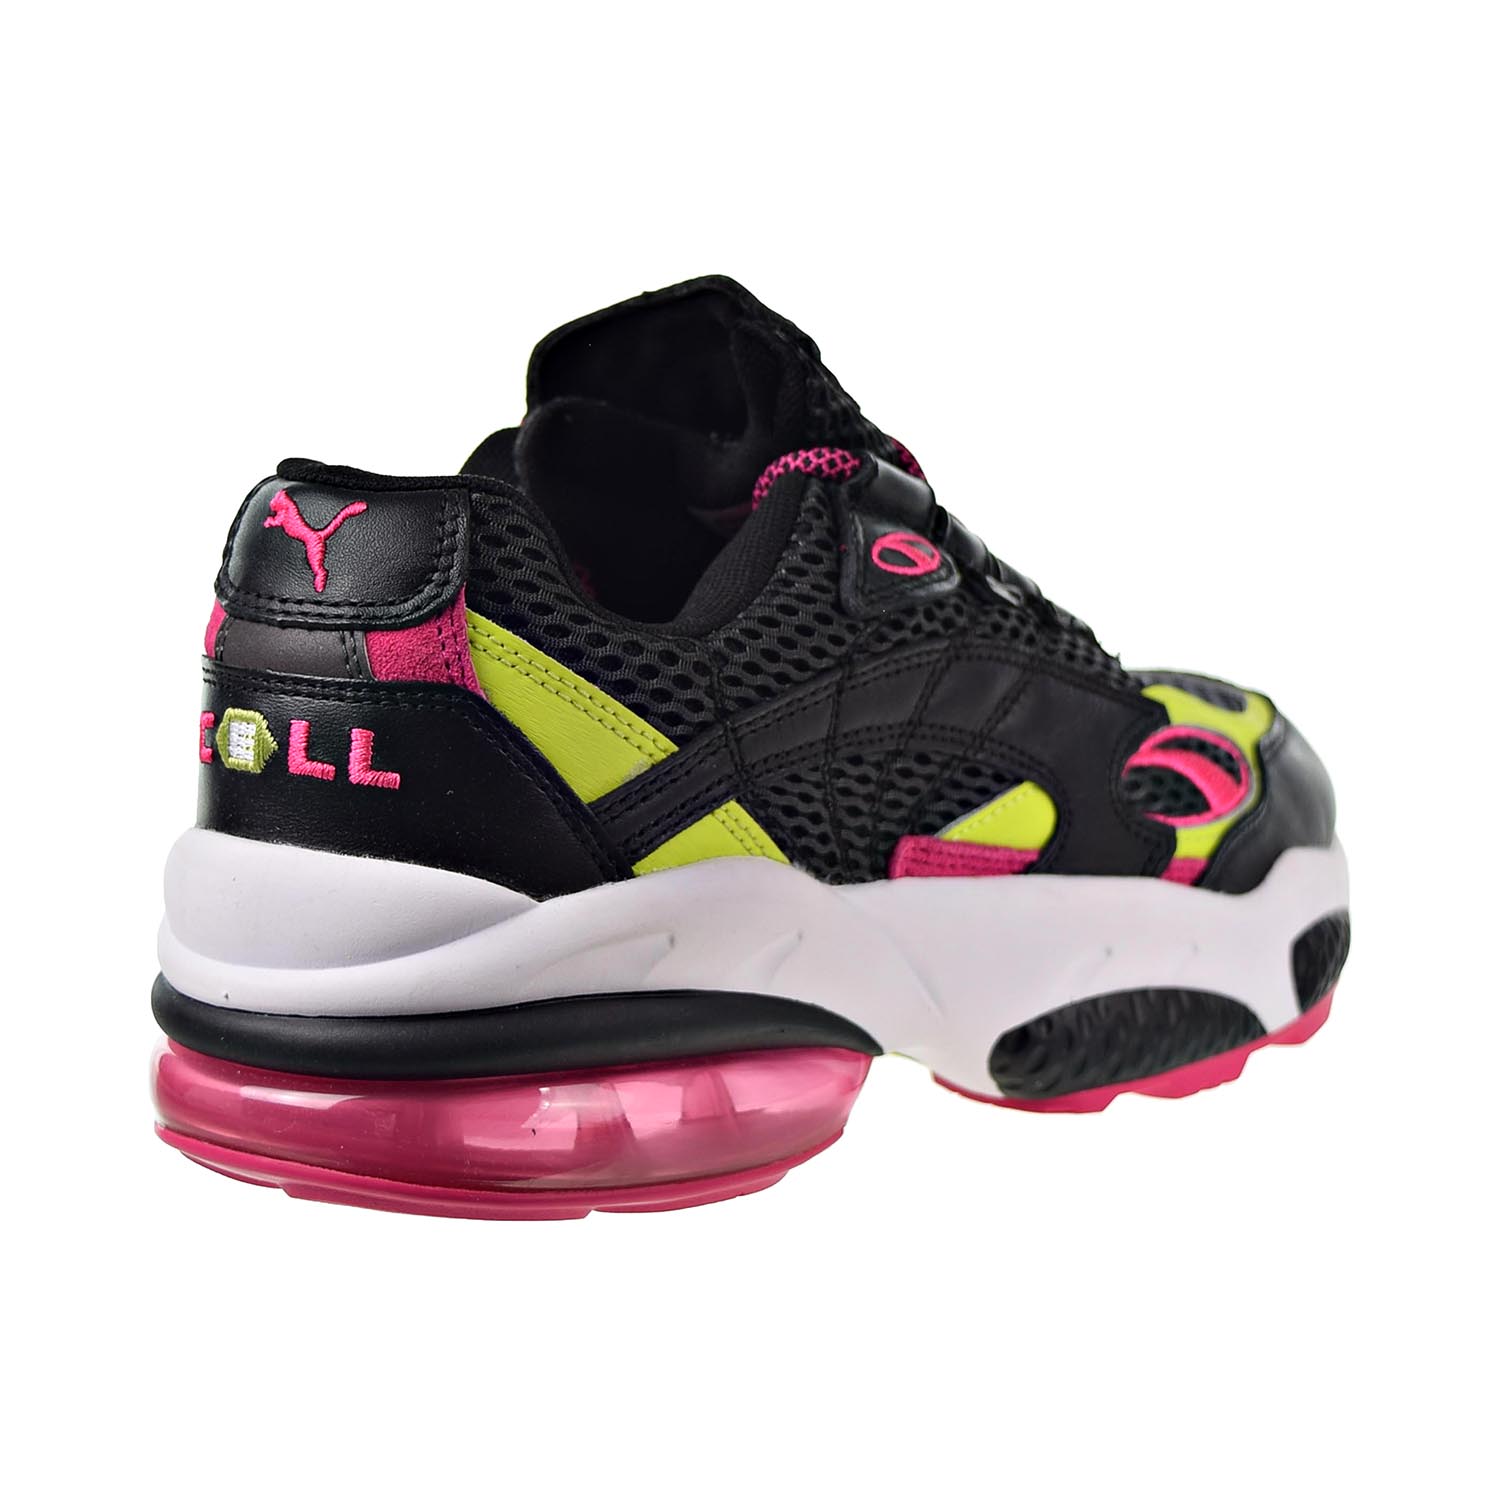 Puma Cell Venom 370417-01 Men Black/Pink/Lime Punch Athletic Running Shoes C1385 (10) - image 3 of 6